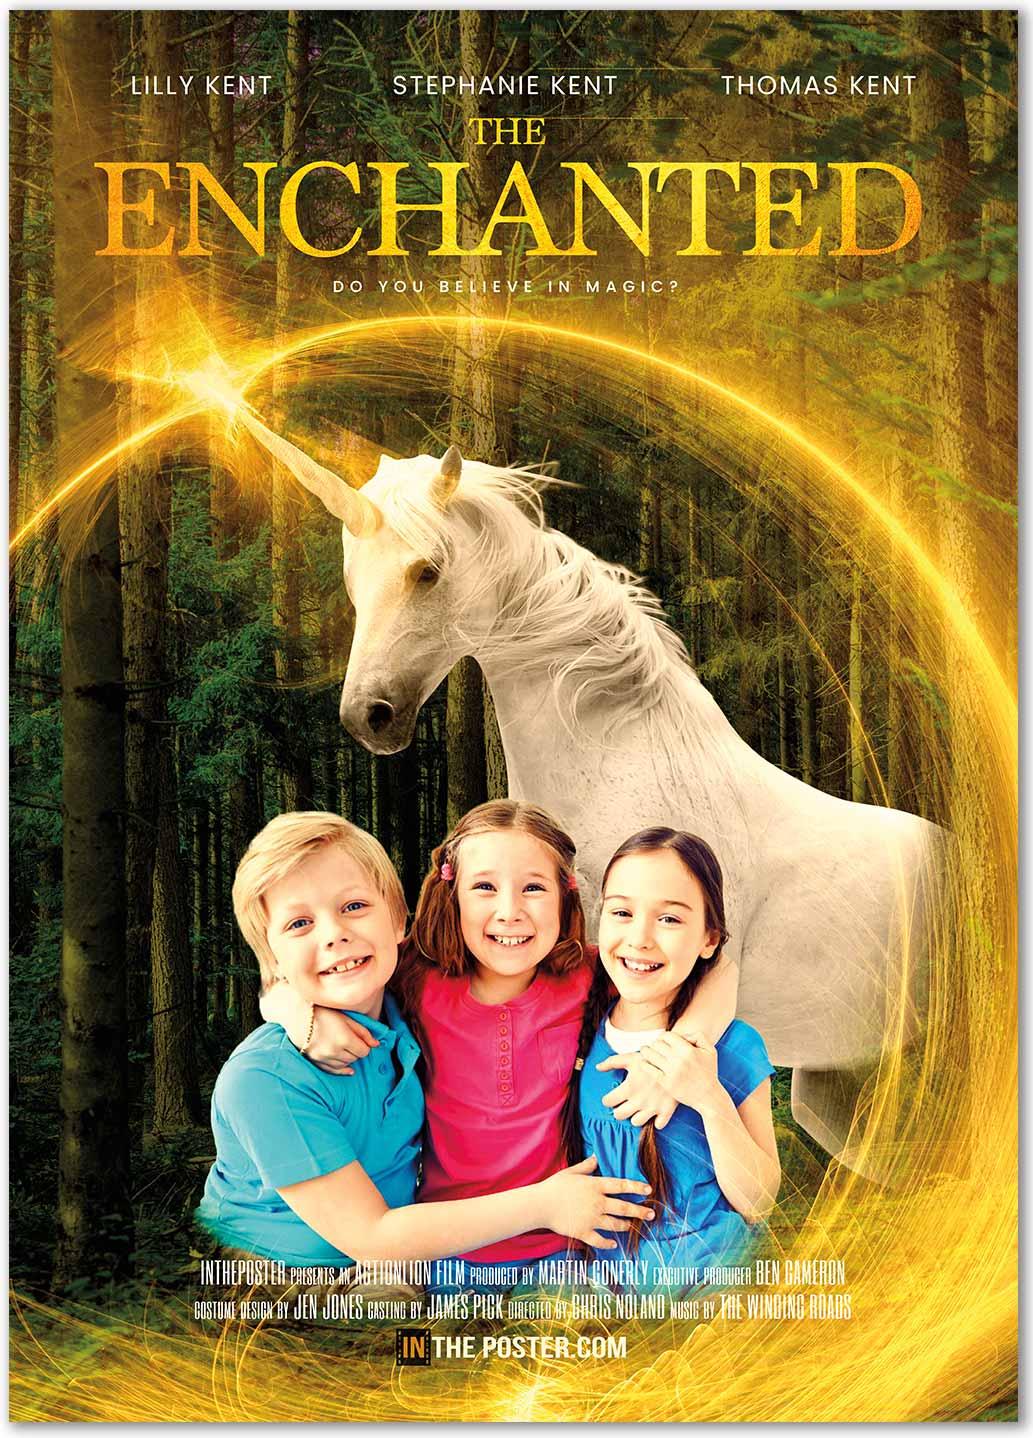 A fantasy movie poster with an enchanted unicorn with a glowing horn and happy children